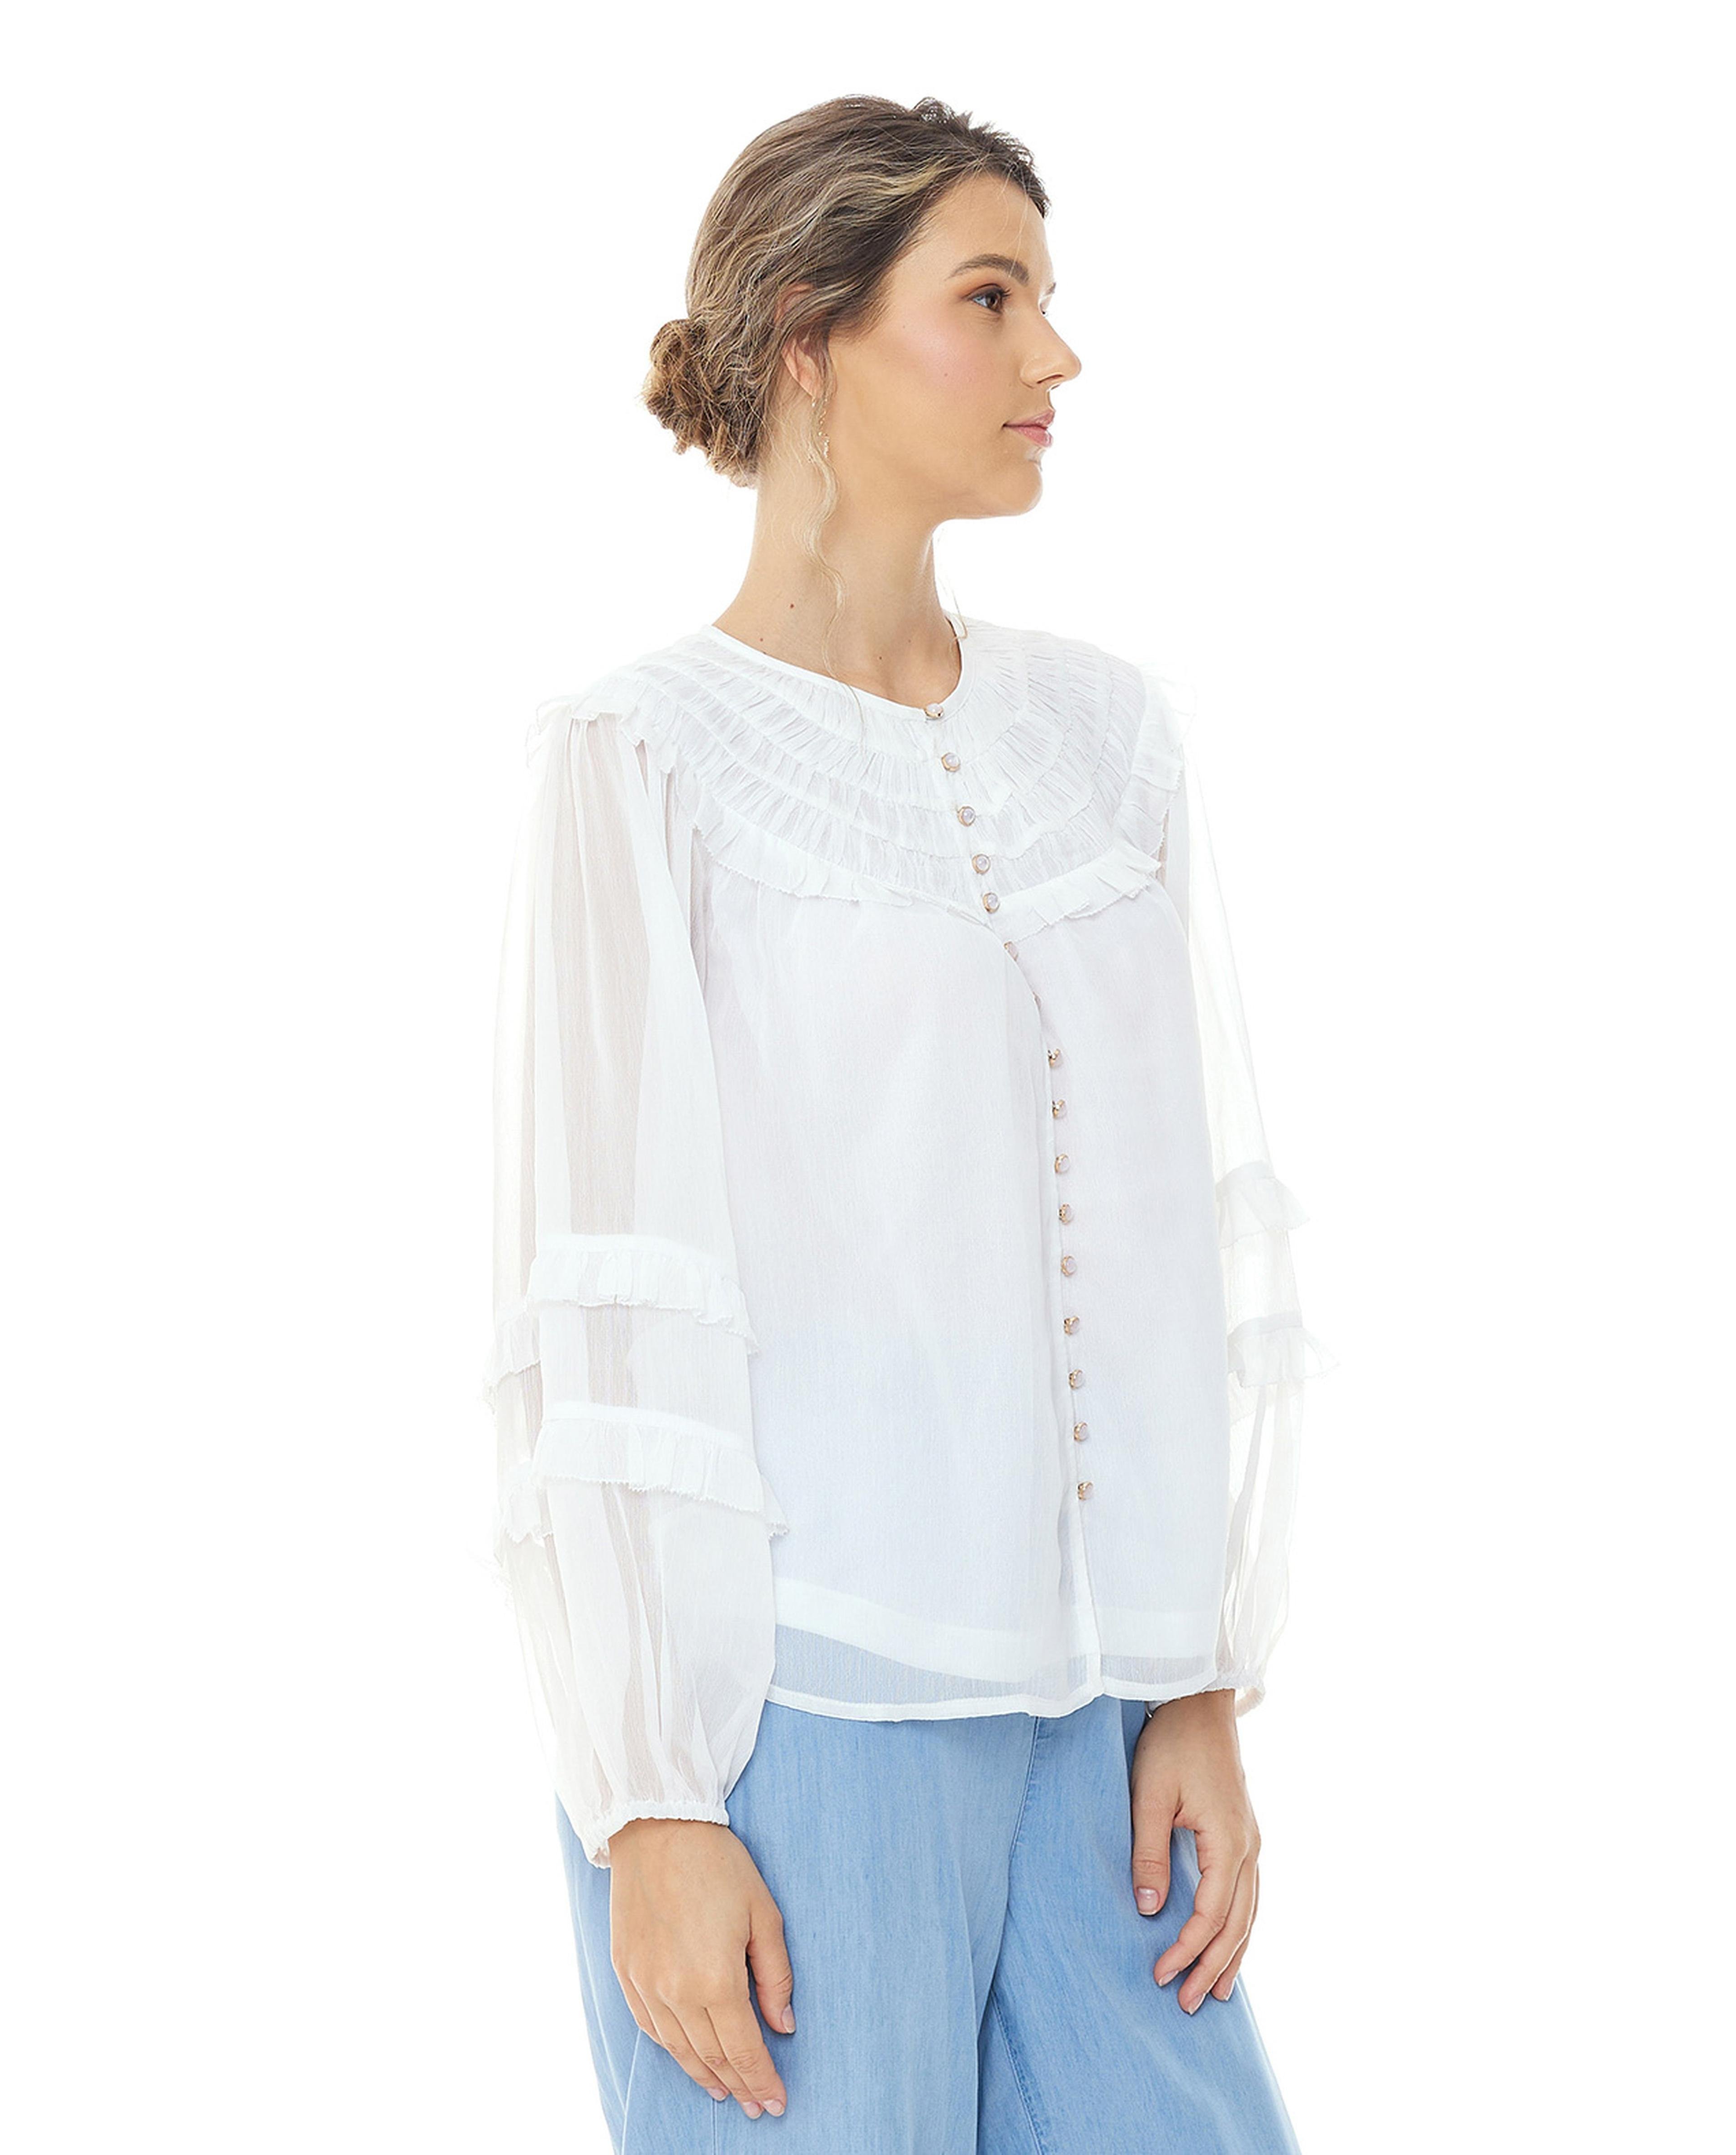 Solid Top with Crew Neck and Ruffle Detail Sleeves